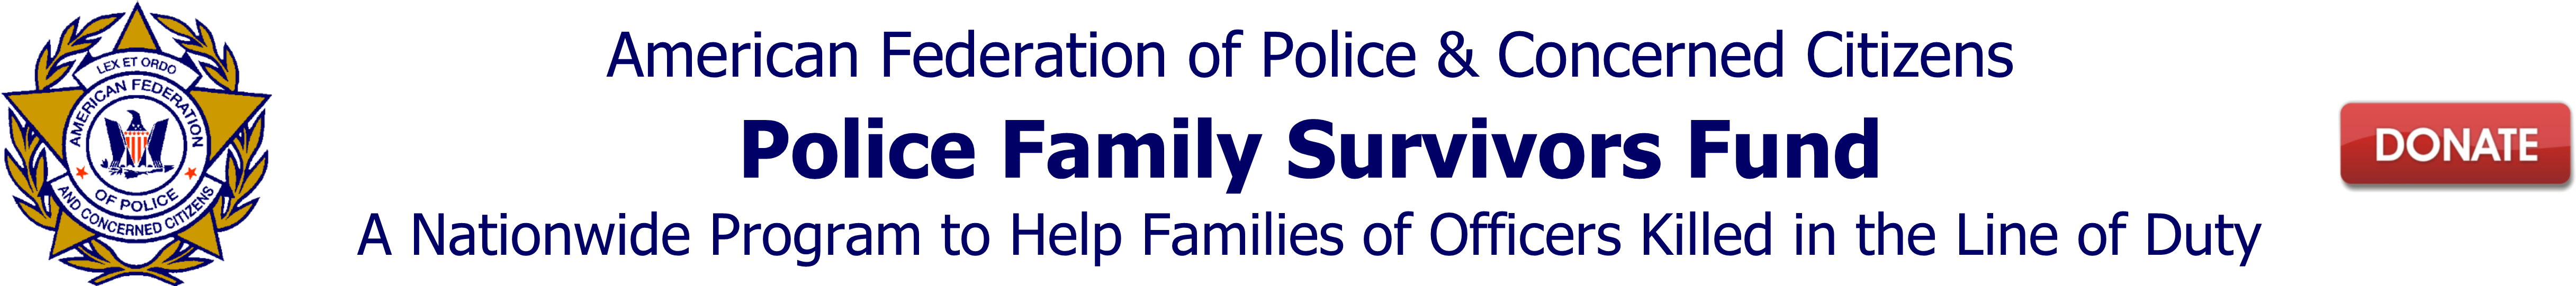 Police Family Survivors Fund Banner PNG